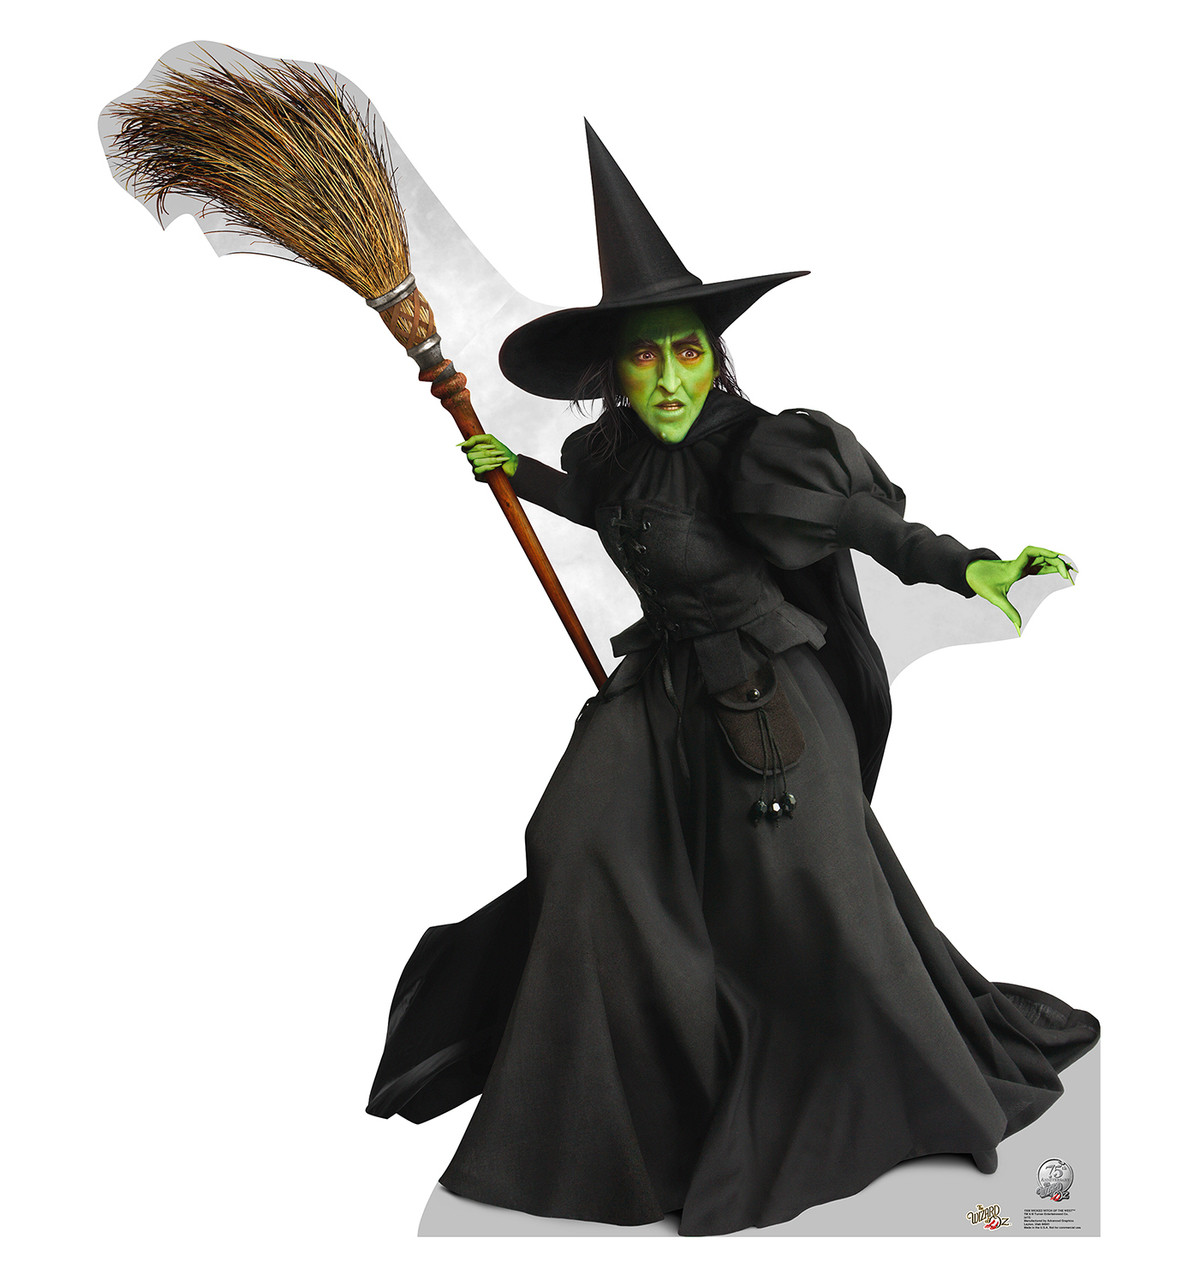 Life-size Wicked Witch of the West - Wizard of Oz 75th Anniversary Cardboard Standup